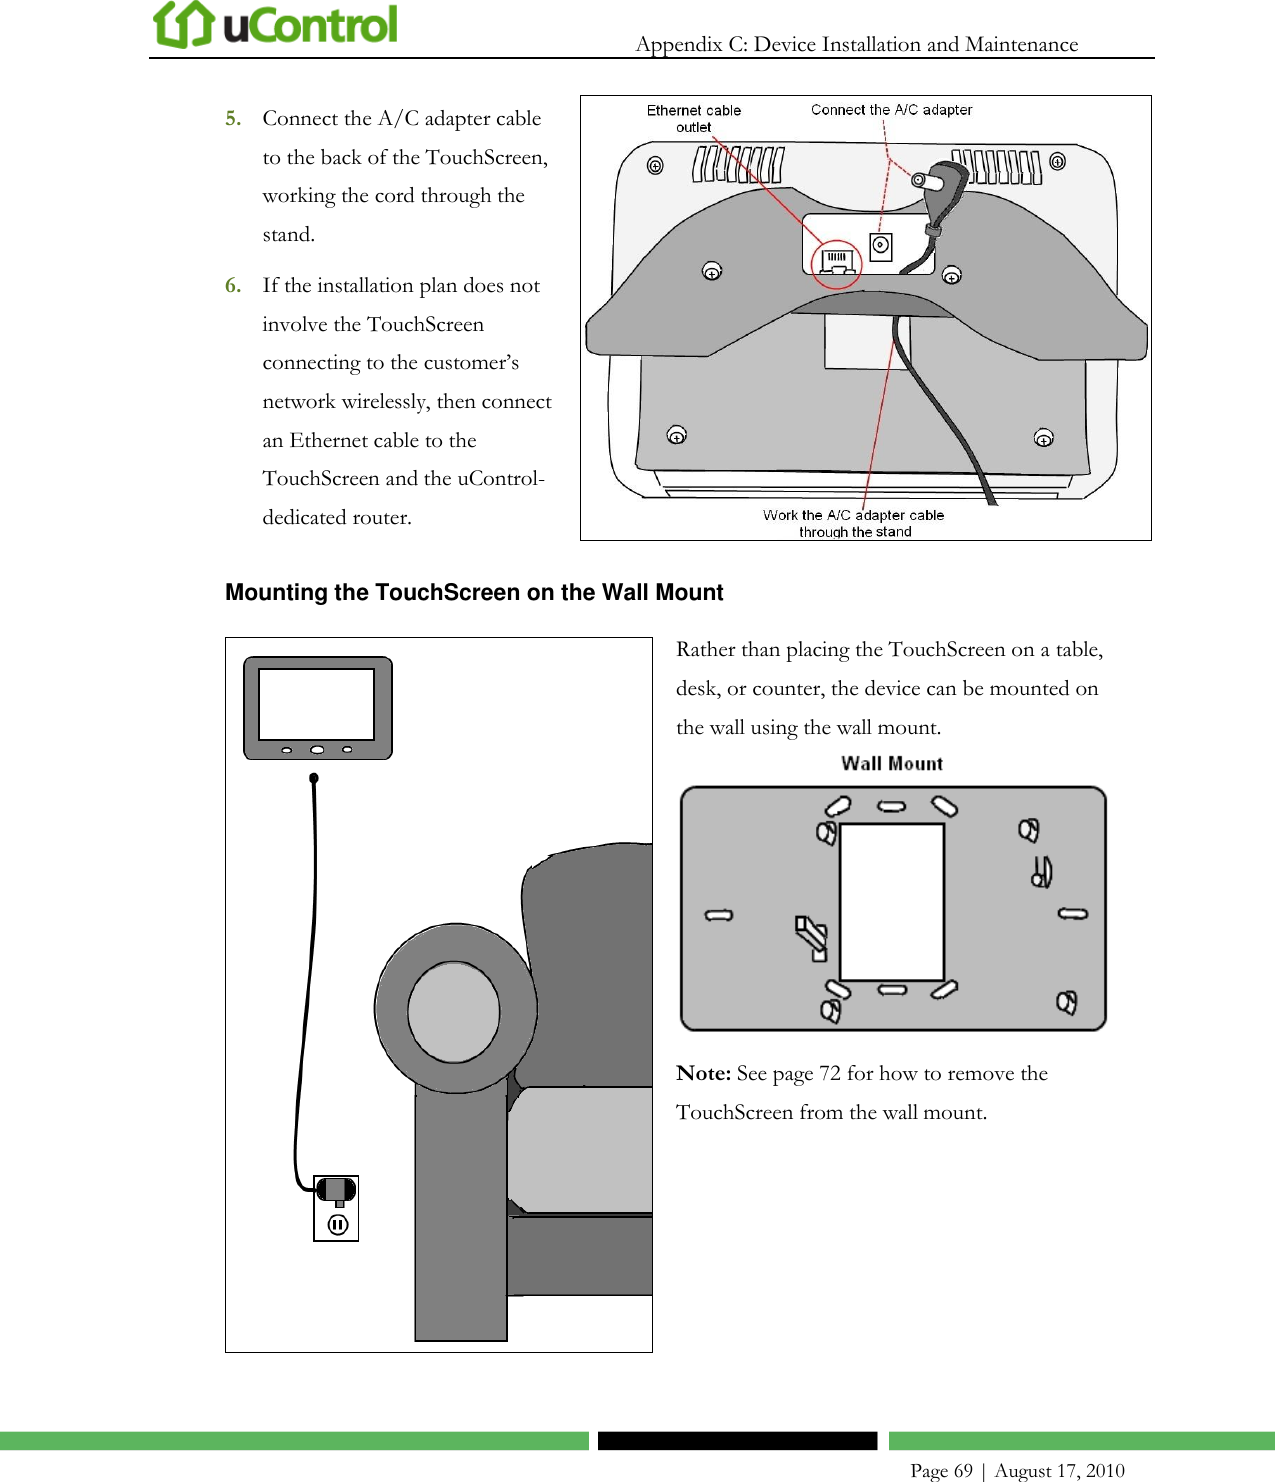   Appendix C: Device Installation and Maintenance    Page 69 | August 17, 2010 5. Connect the A/C adapter cable to the back of the TouchScreen, working the cord through the stand.  6. If the installation plan does not involve the TouchScreen connecting to the customer’s network wirelessly, then connect an Ethernet cable to the TouchScreen and the uControl-dedicated router.  Mounting the TouchScreen on the Wall Mount  Rather than placing the TouchScreen on a table, desk, or counter, the device can be mounted on the wall using the wall mount.  Note: See page 72 for how to remove the TouchScreen from the wall mount.  